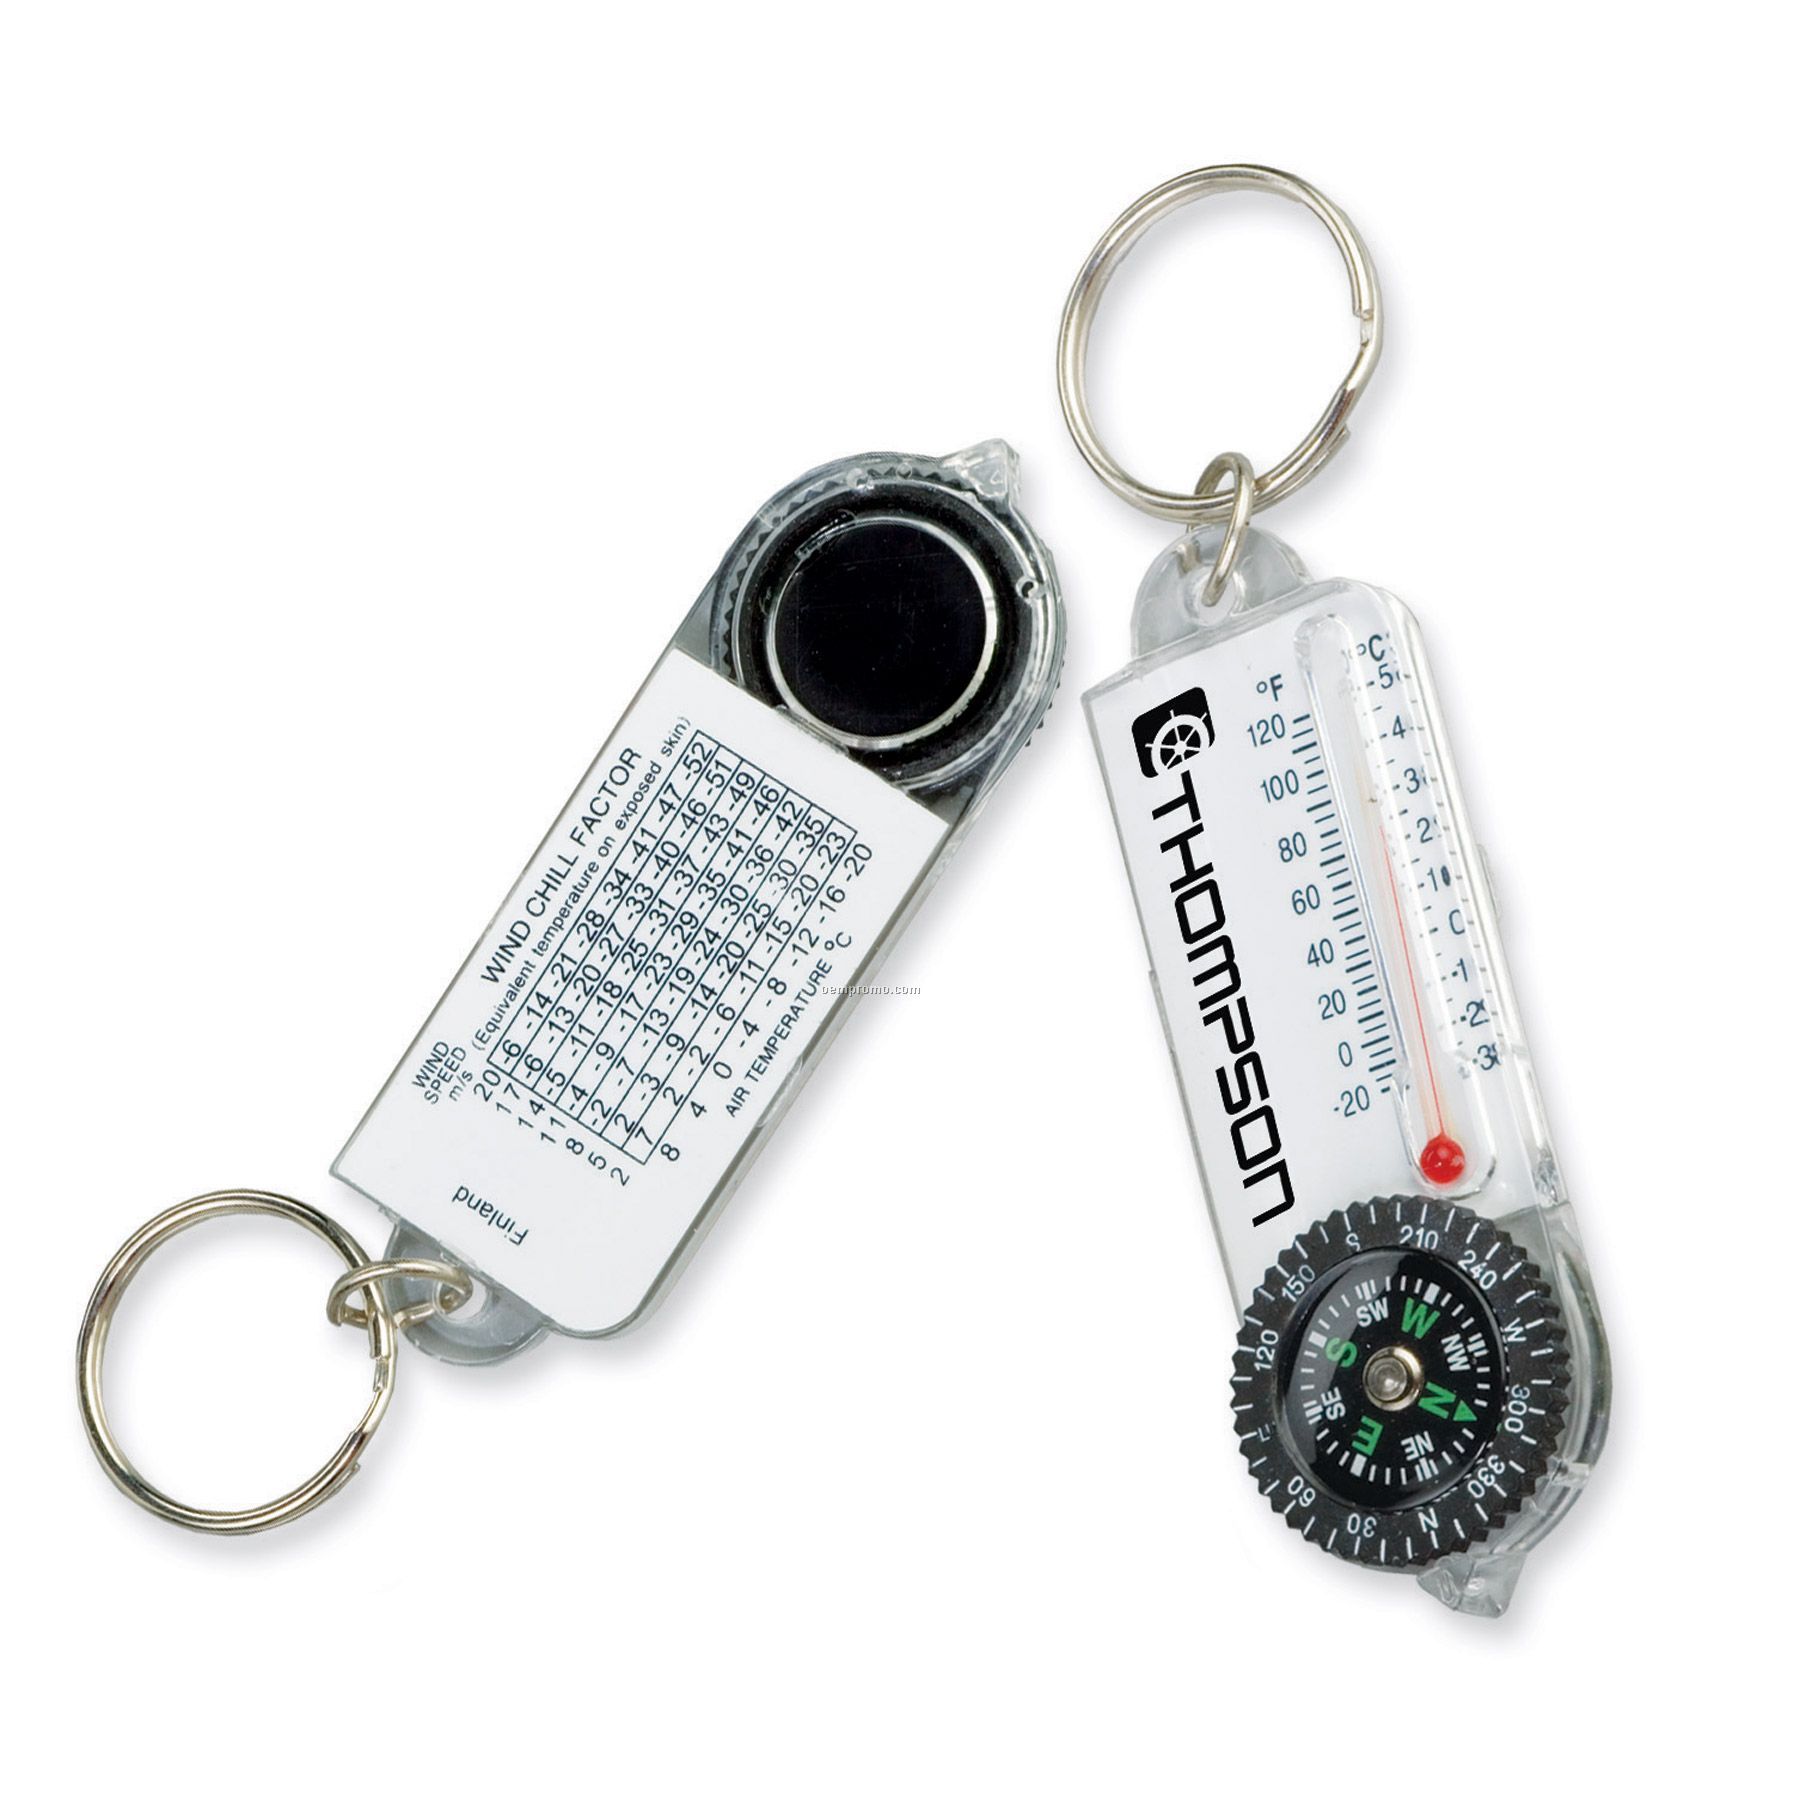 Thermometer/ Compass Key Tag